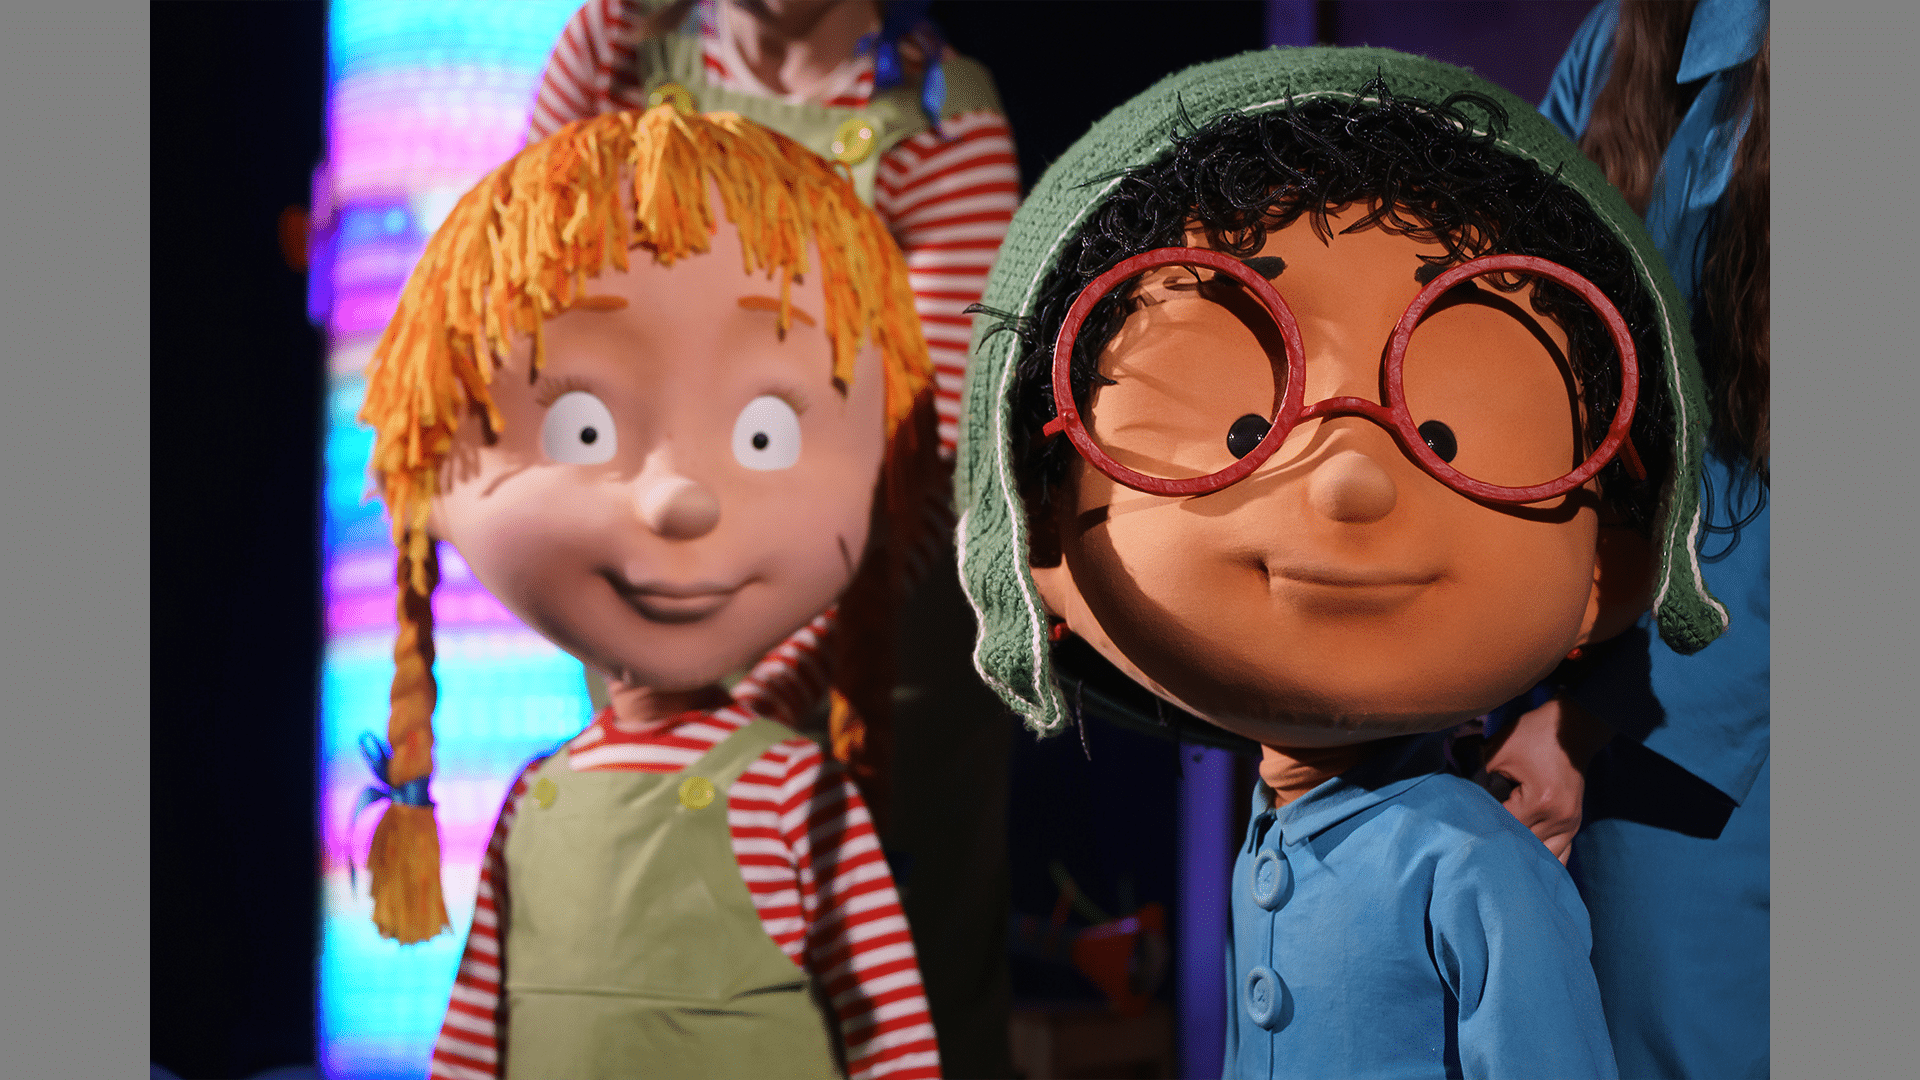 Tilly and Norbert stand looking at the camera. Tilly has ginger hair in two plaits, and Norbert has round red classes and a green hat.